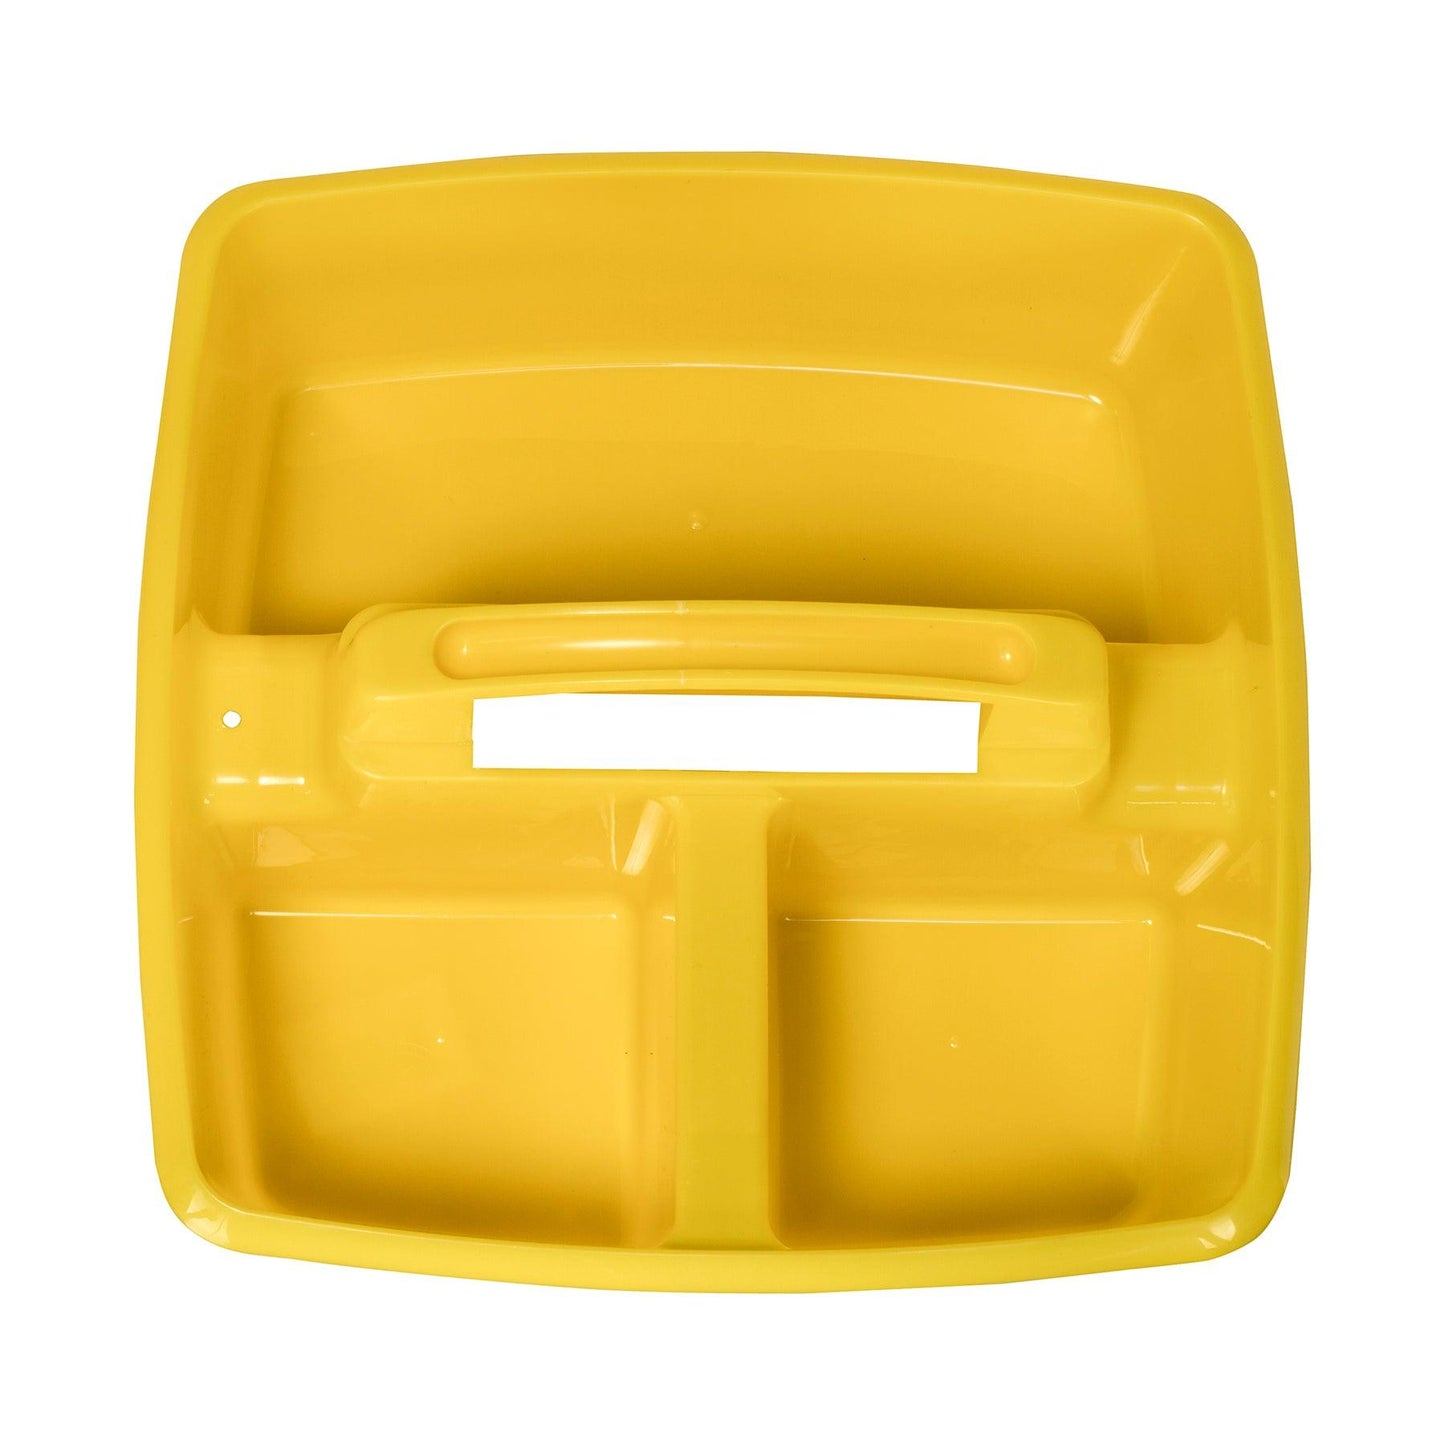 Small Caddy, Yellow, Pack of 6 - Loomini